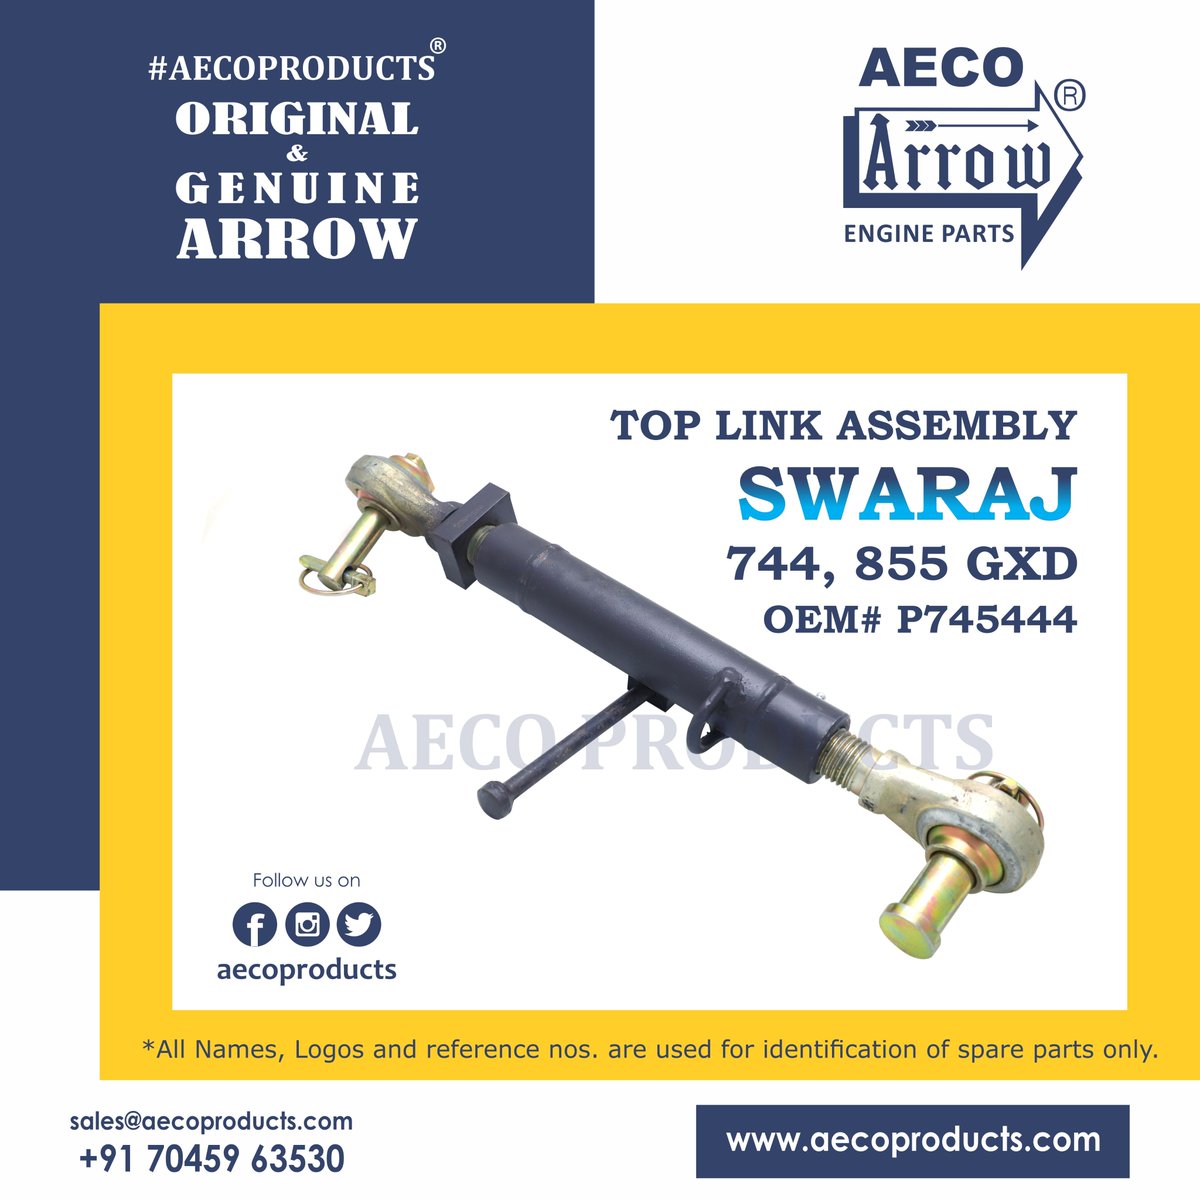 TOP LINK ASSEMBLY (WITH 2 PIN + 2 LINCH PIN ) SWARAJ 744, 855 GXD
OEM # P745444
AGRA ENGINEERING CO. (AECO)
aecoproducts.com 
+91 70459 63530
#aecoproducts #swaraj #linkassy #linkpart #swarajparts #indianmanufacturer #sparepartsmanufacturer #agraengineering #arrowagra